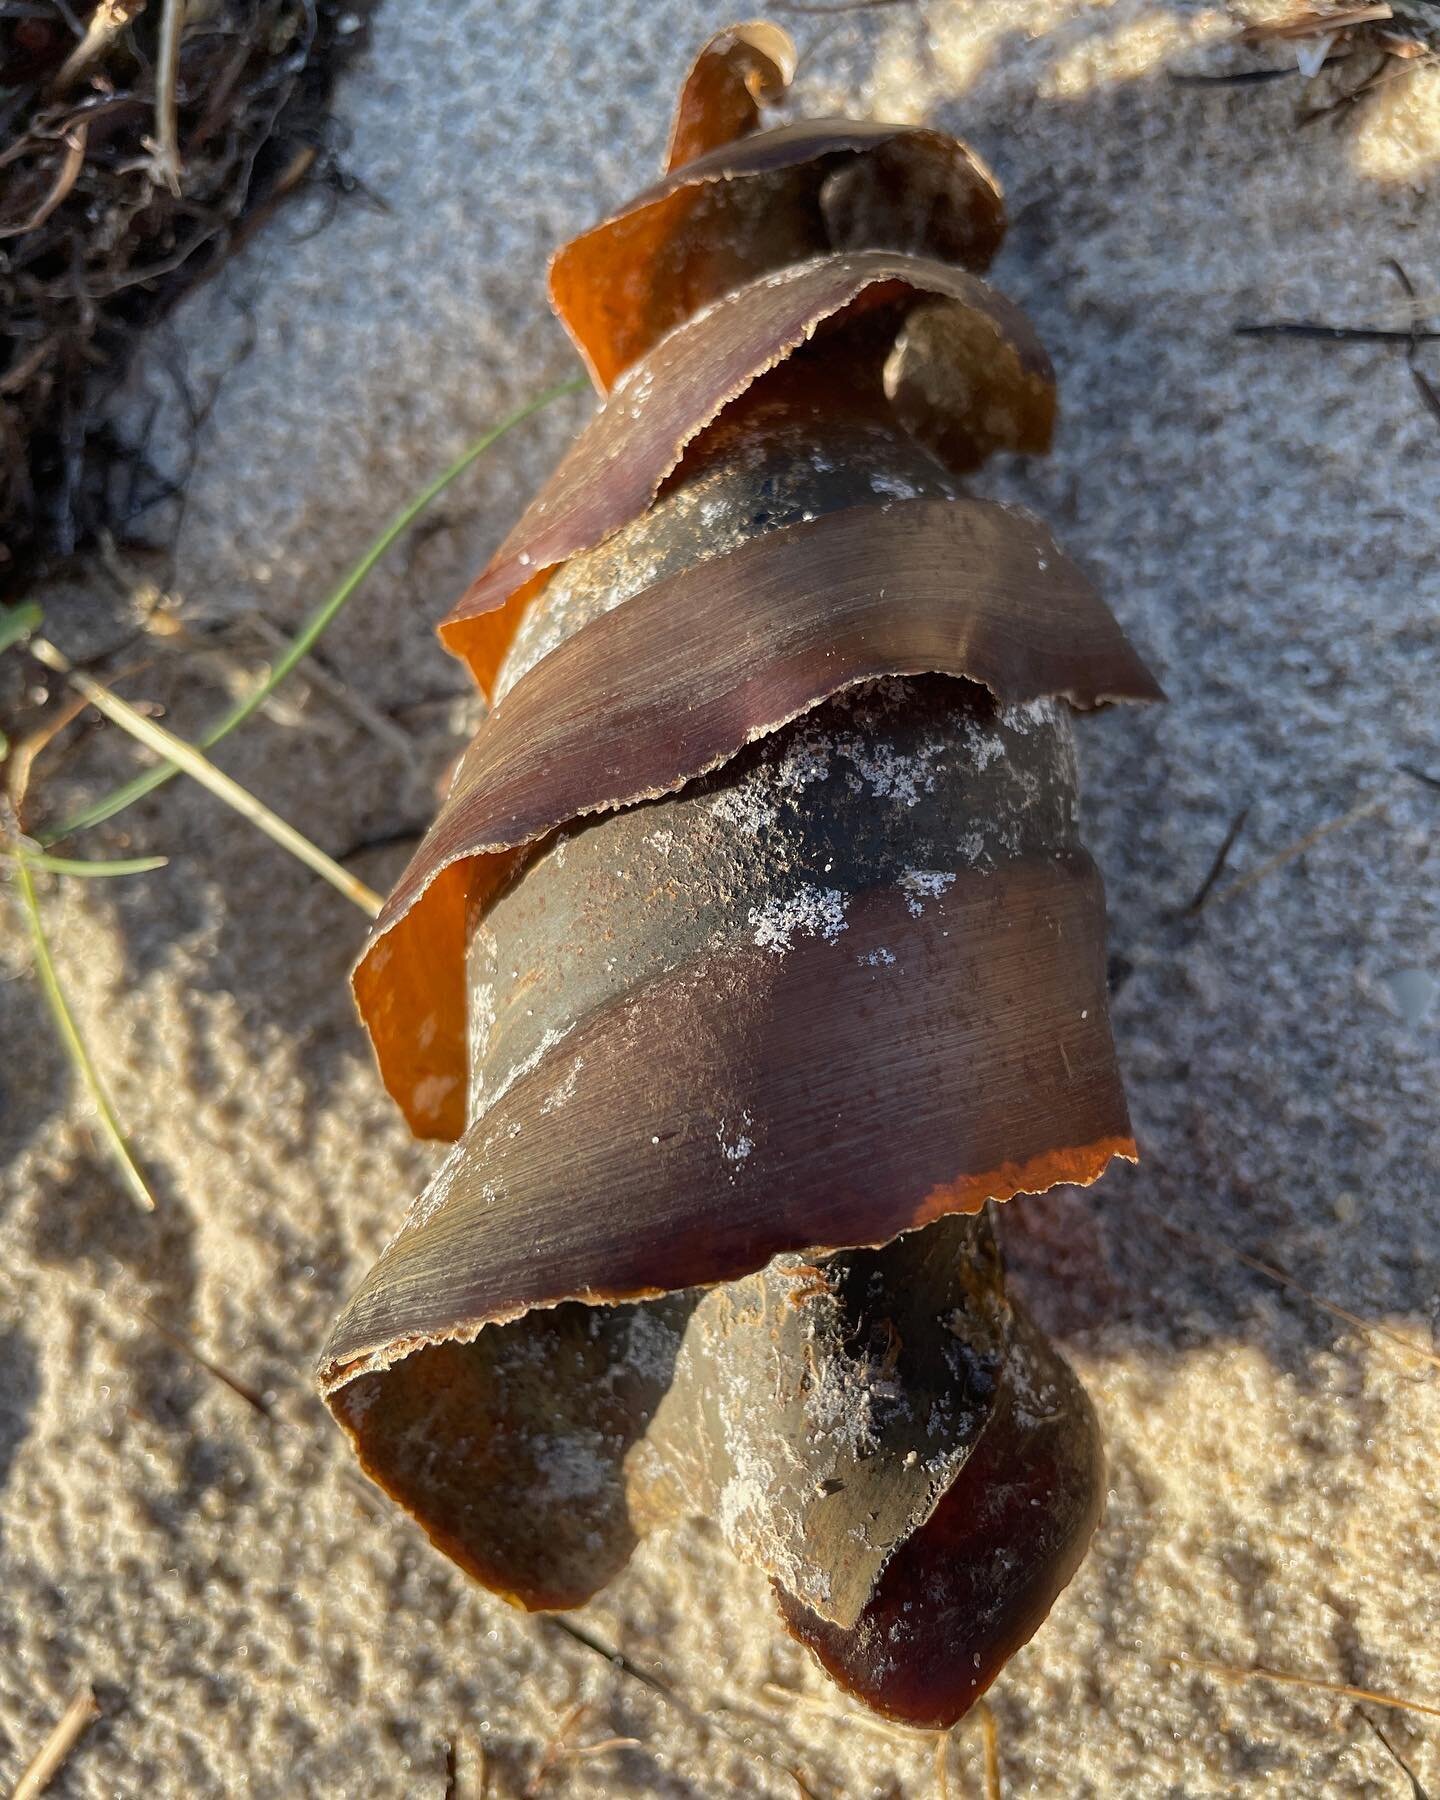 Happy Fauna Friday 🌟

Have you come across these walking along the beach recently? They are the egg casings from a port Jackson Shark. 🩶

The Port Jackson Shark has a distinctive blunt head with a spine in front of both dorsal fins. They have harne